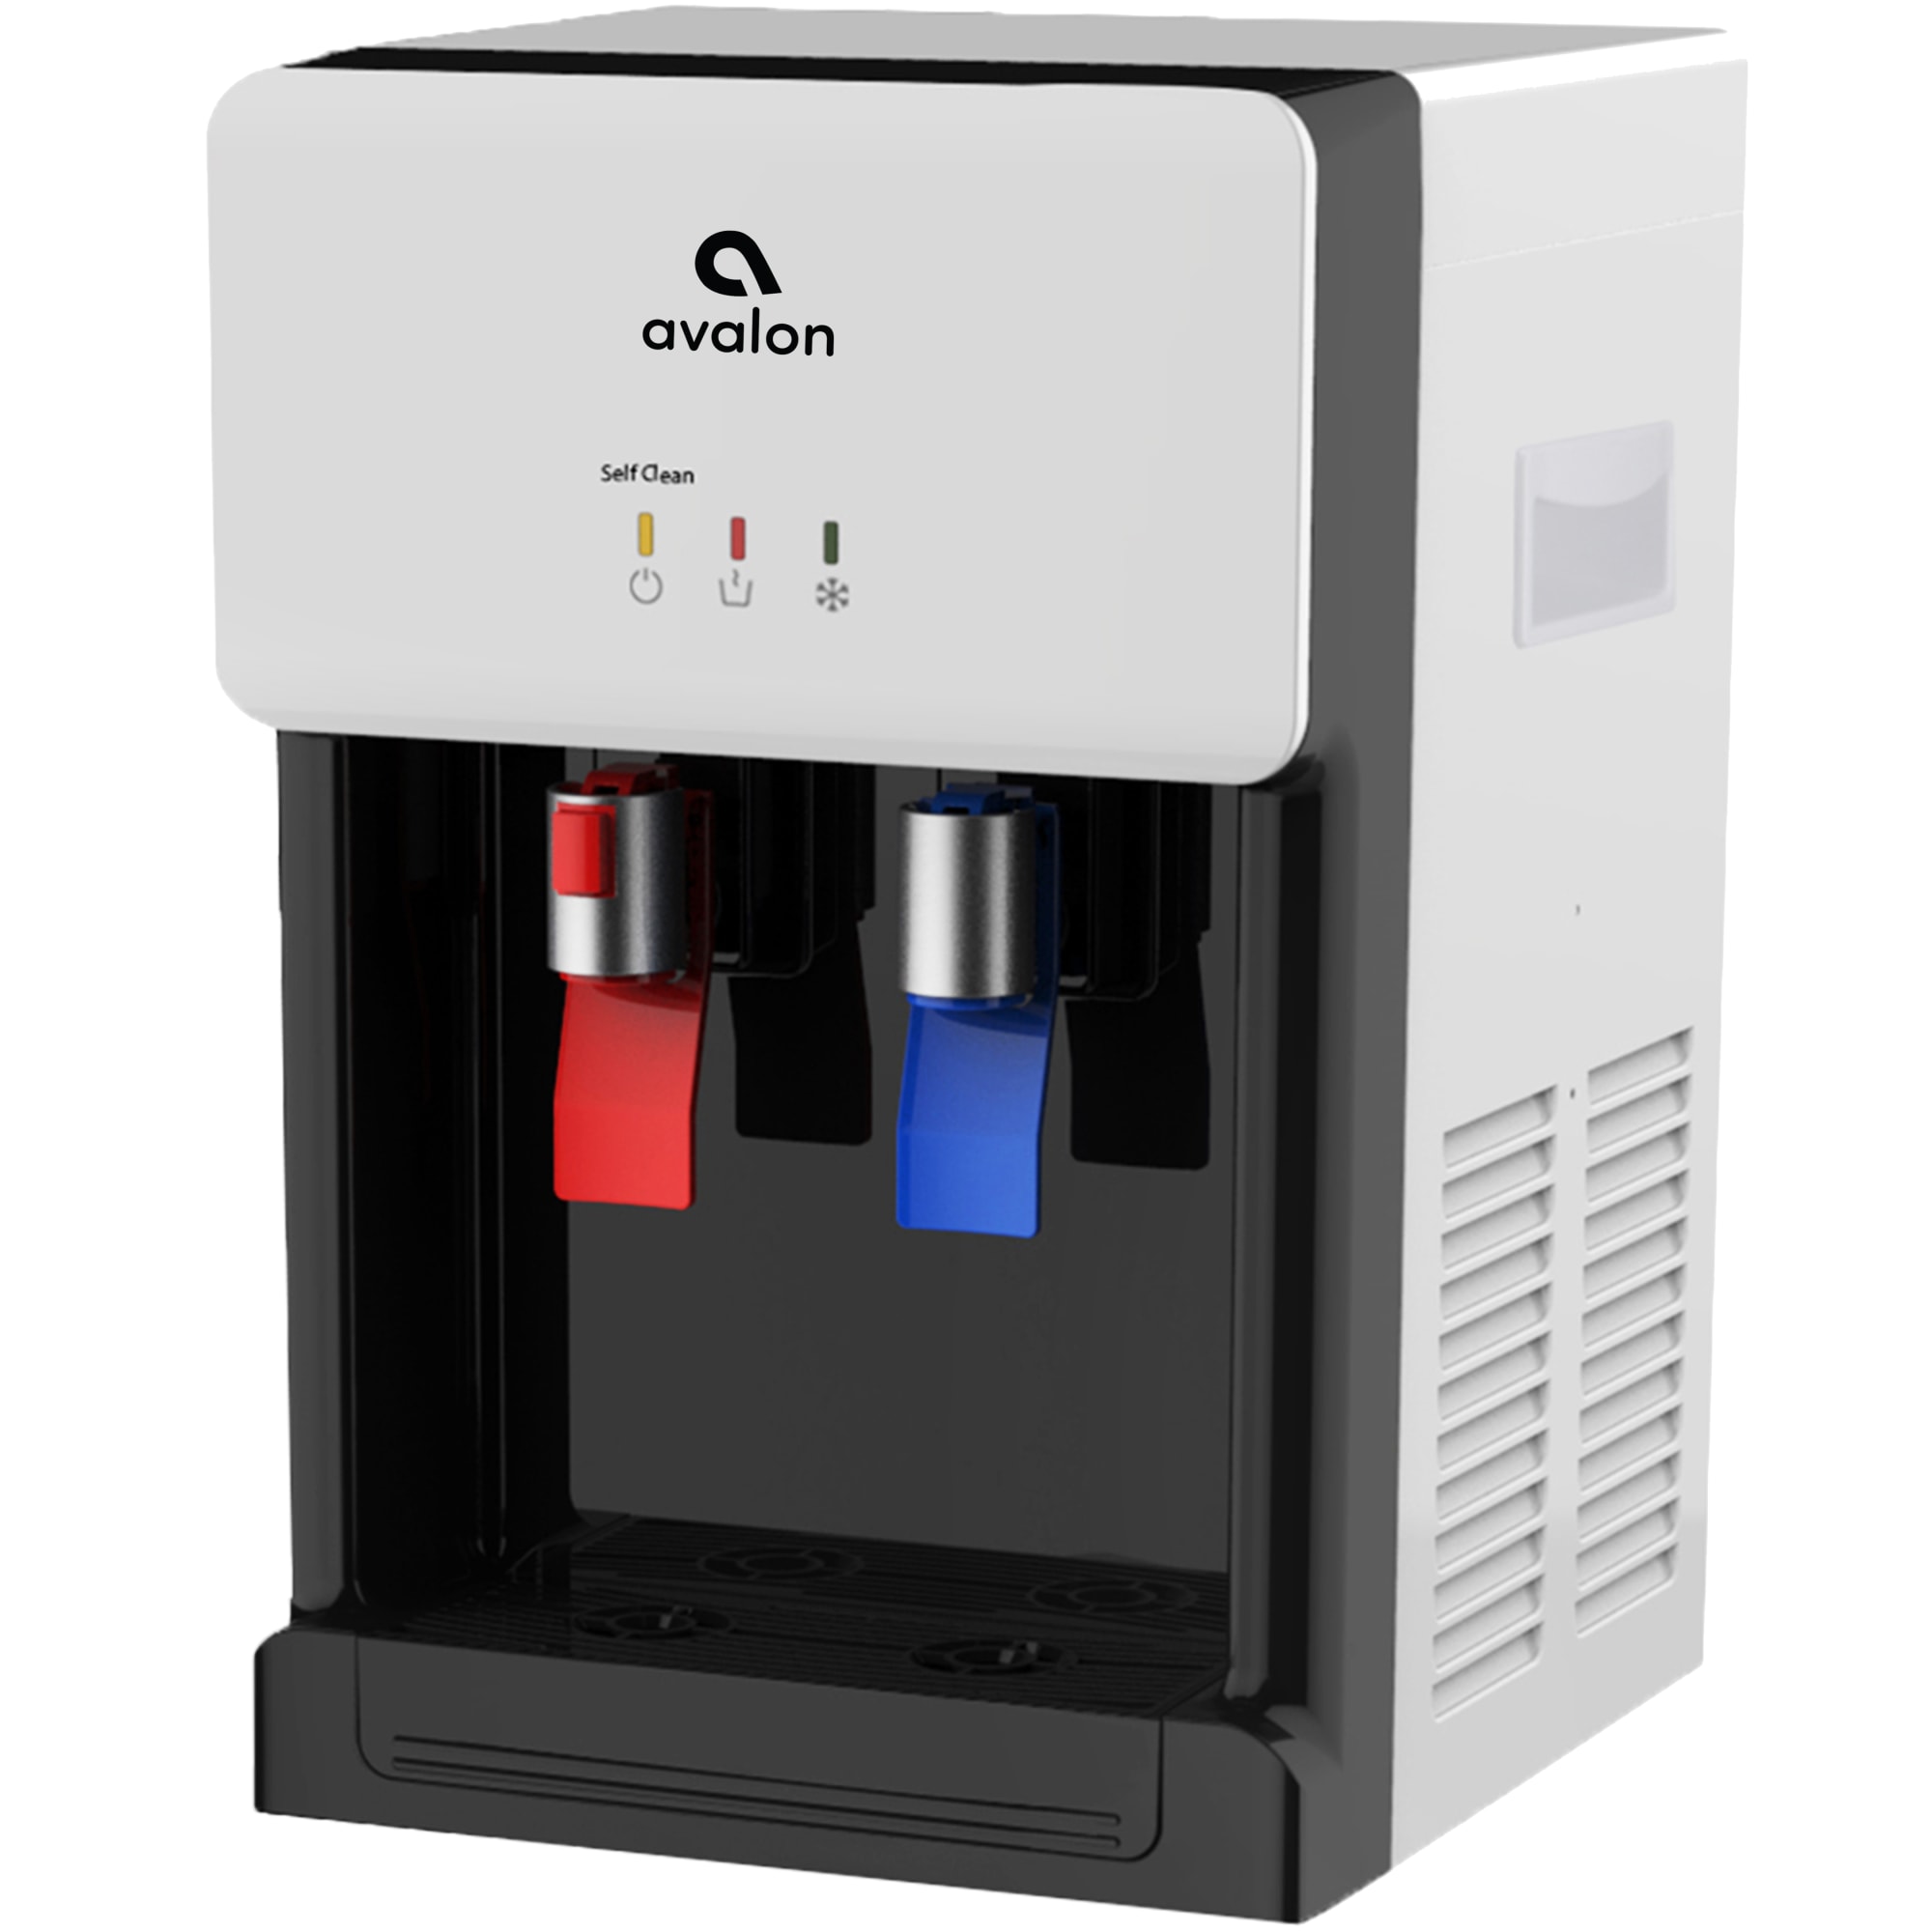 Avalon Countertop Self Cleaning Bottleless Water Dispenser - Hot & Cold Water Temperature, White - image 2 of 4